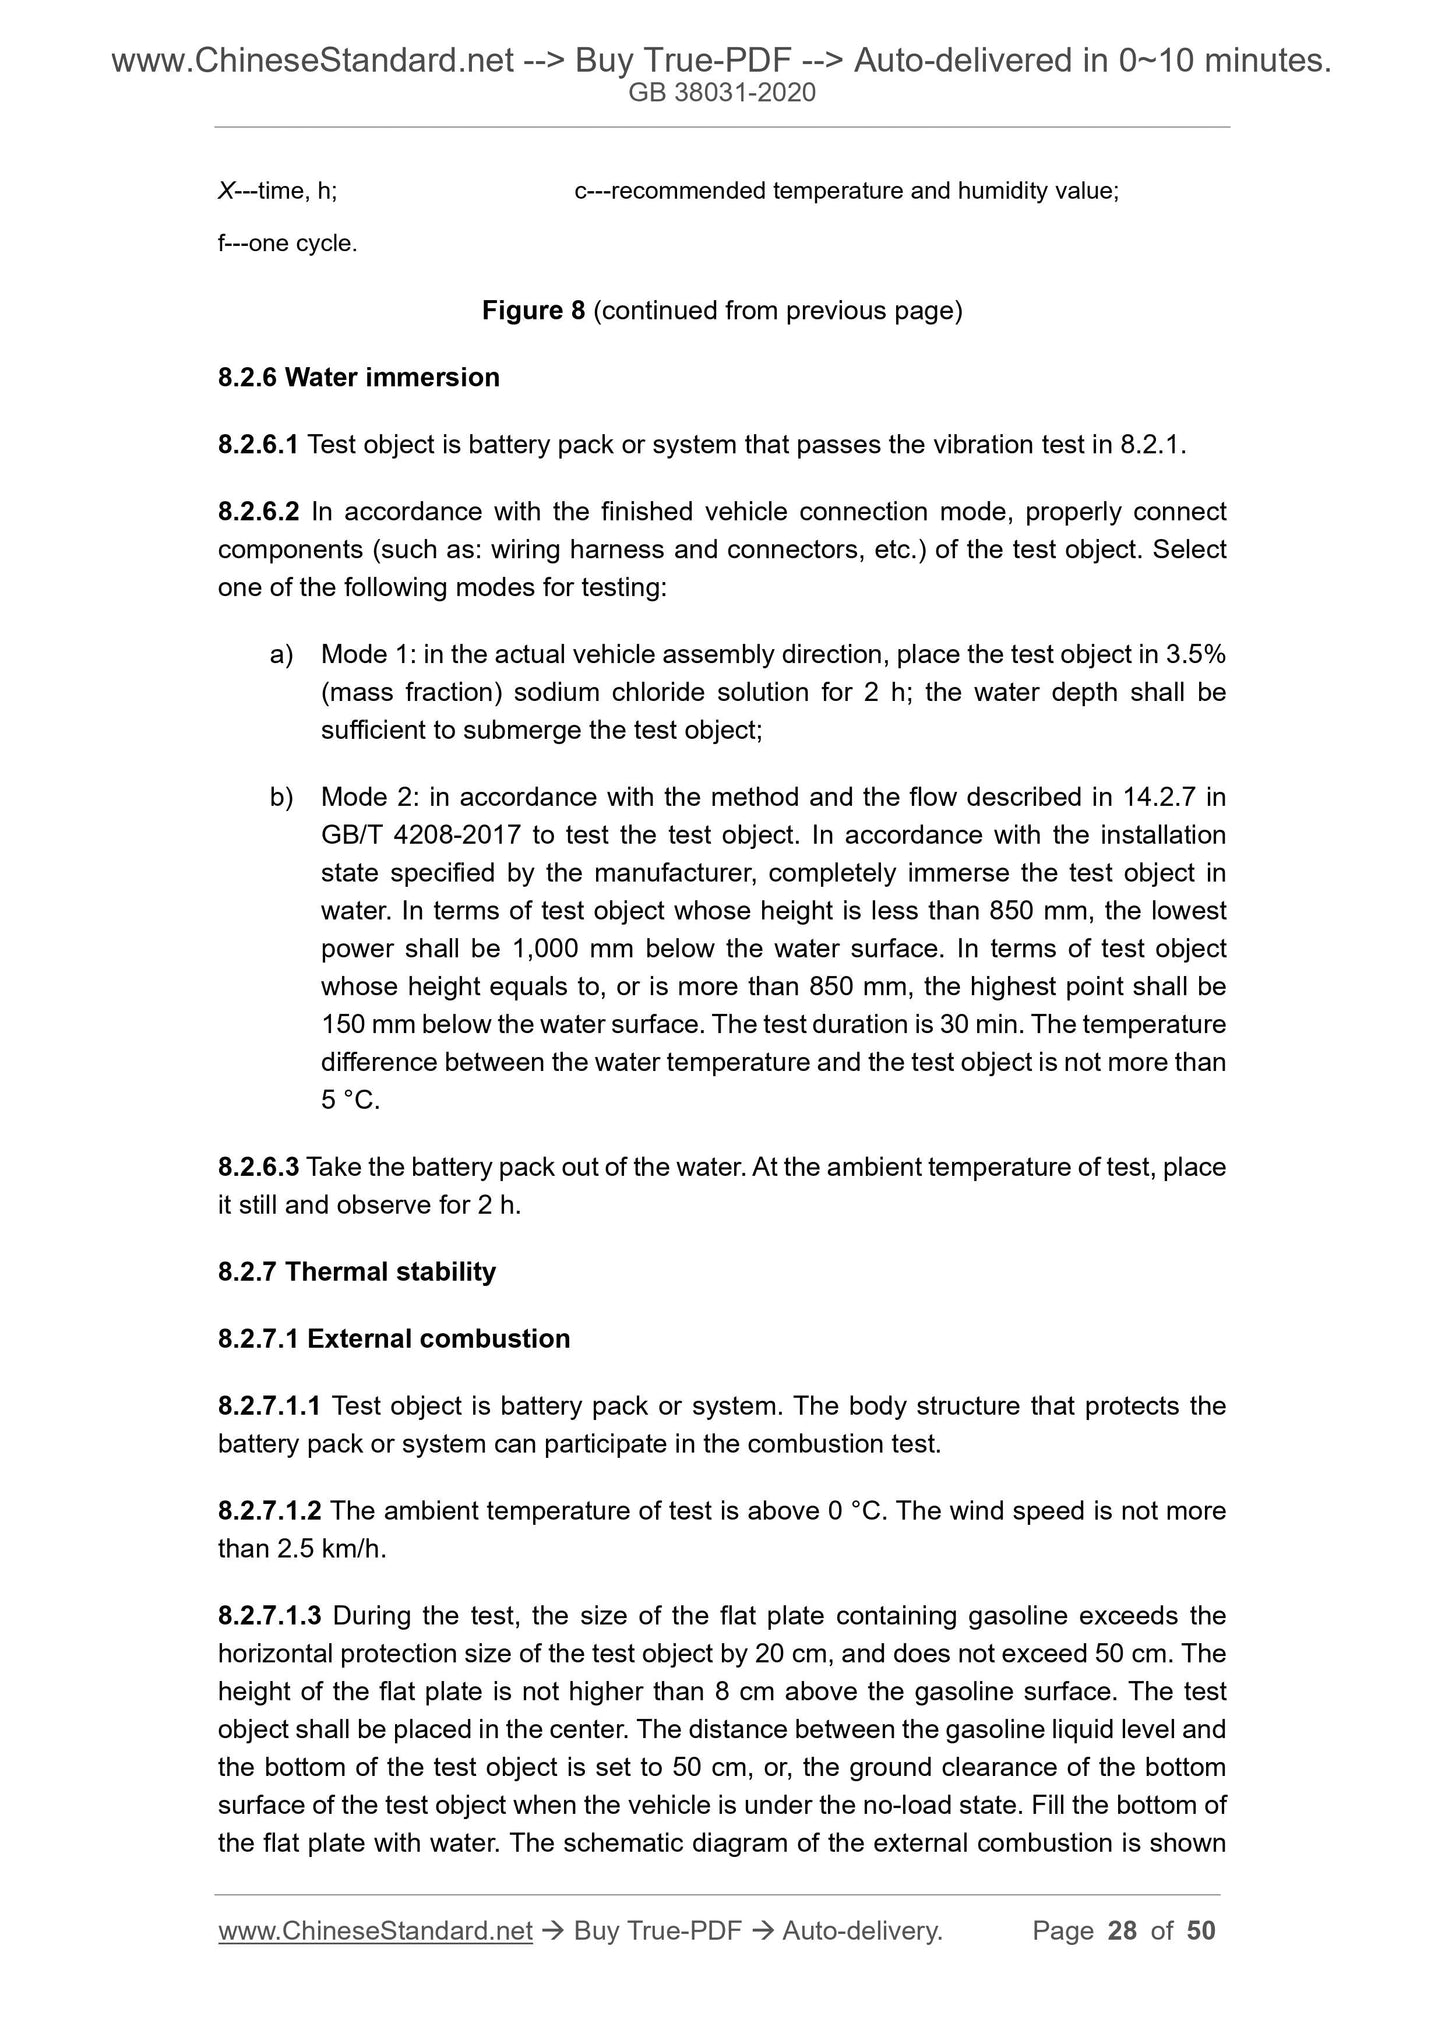 GB 38031-2020 Page 10